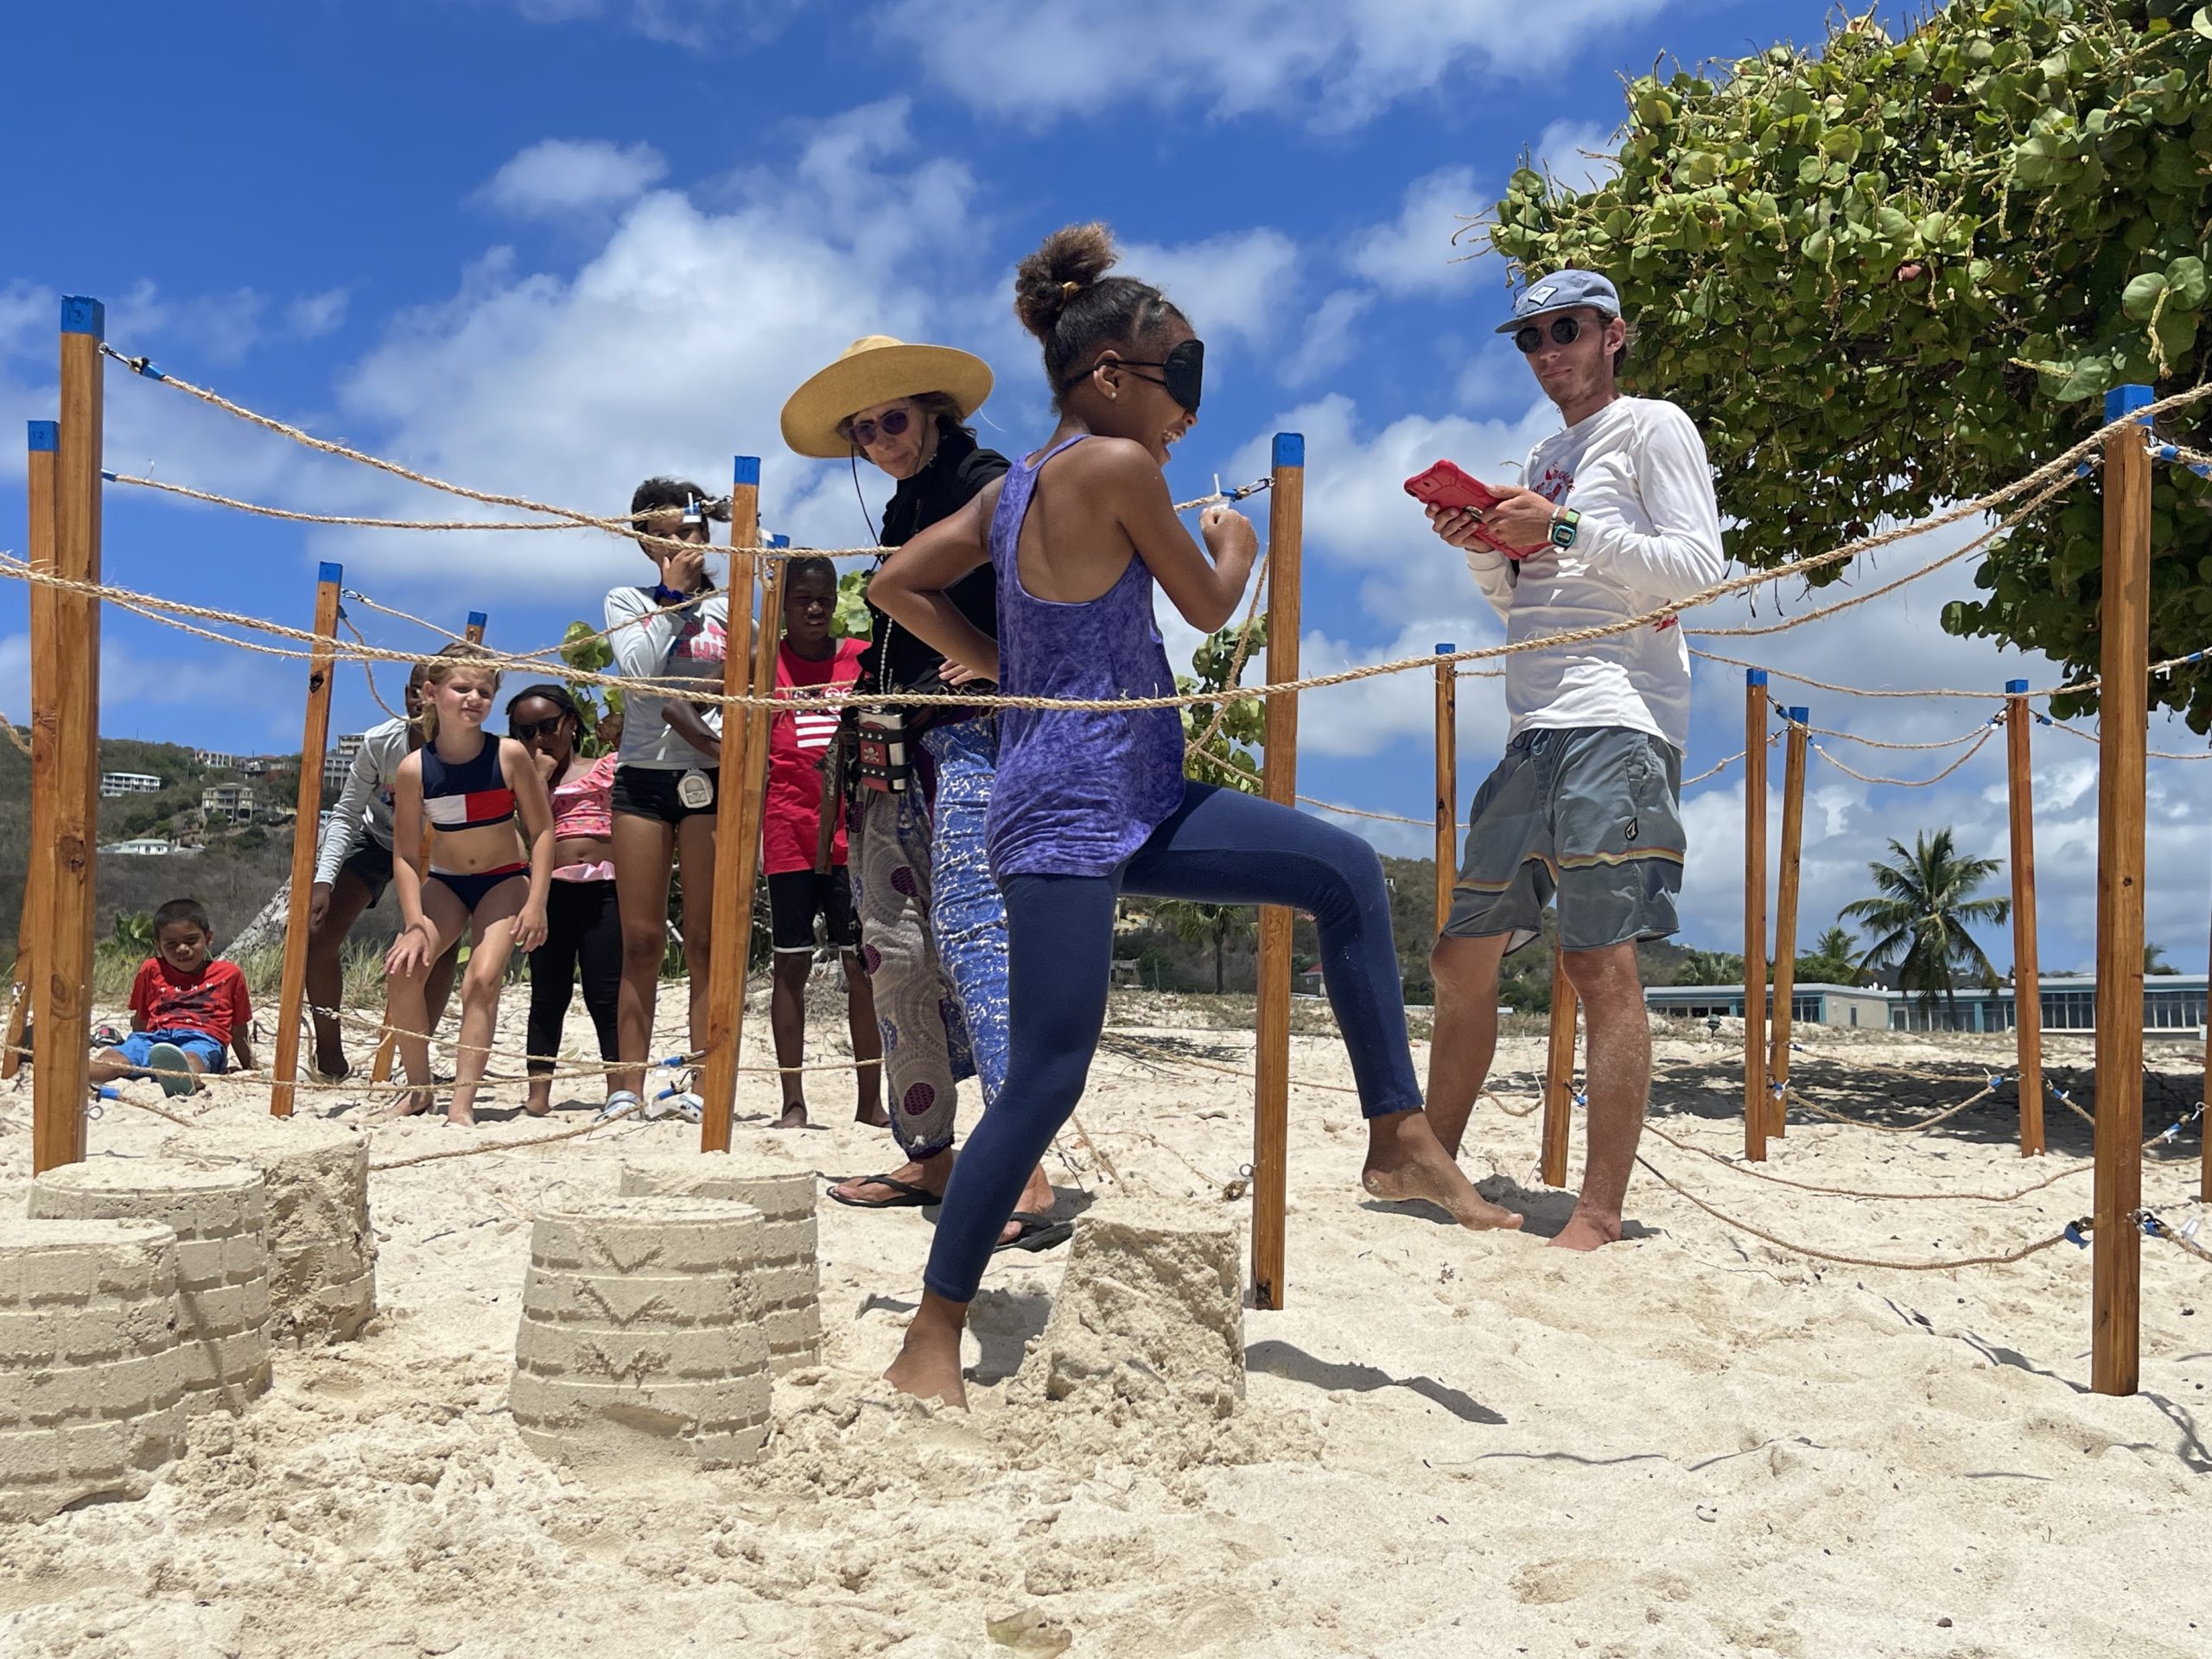 A blindfolded girl steps over a sandcastle while going through a maze made of stakes and ropes. A man with a baseball hat an an iPad stands near by. A woman with a sun hat and a group of children are also nearby watching.